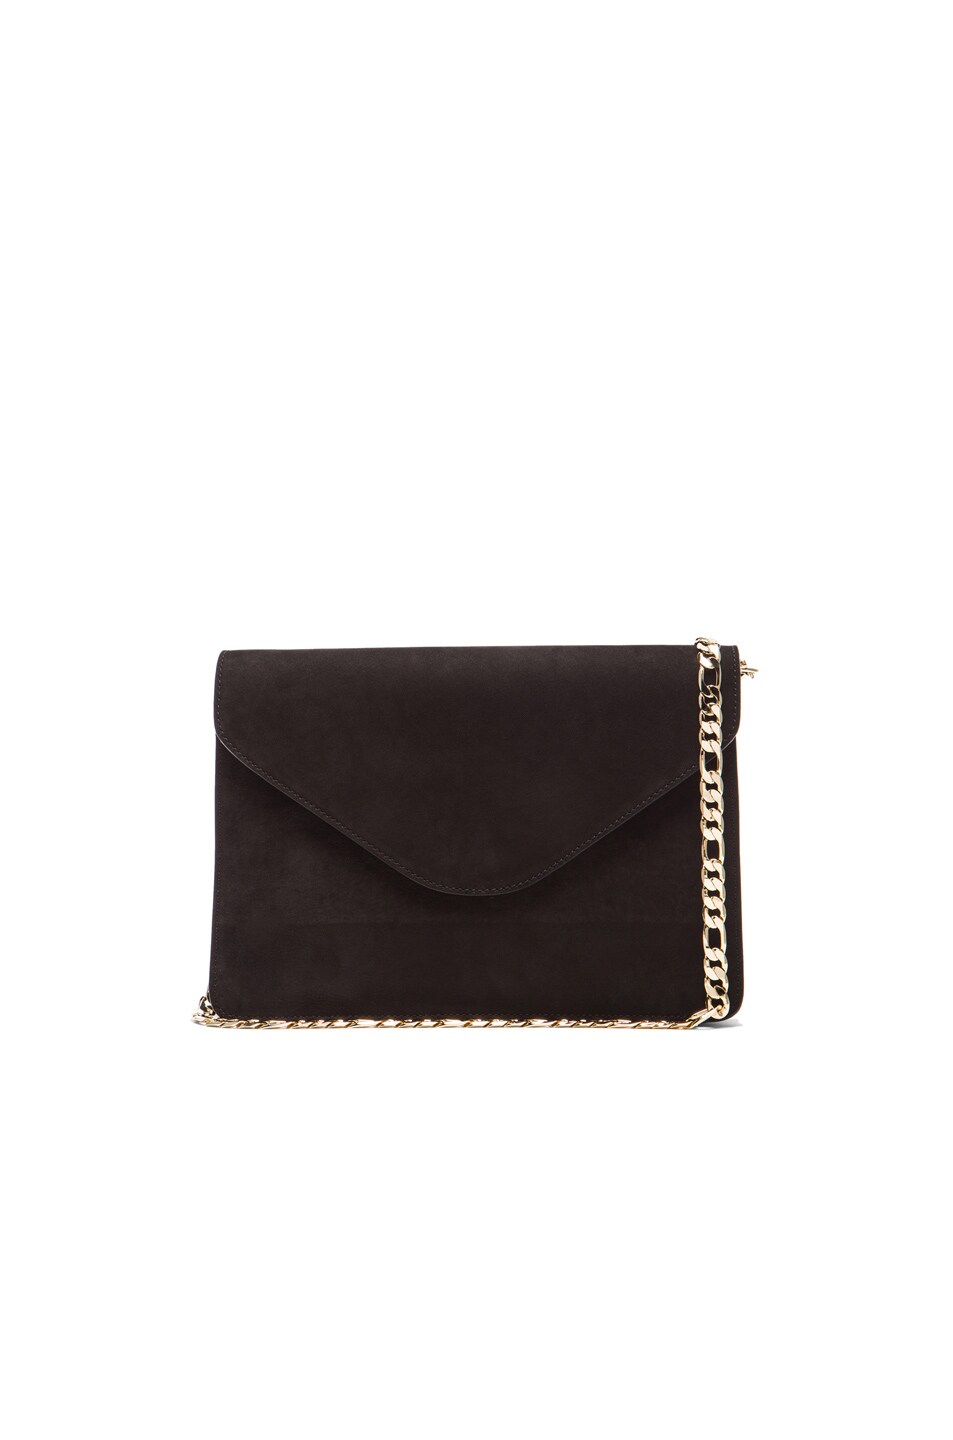 Image 1 of A.P.C. Victoire Bag in Black